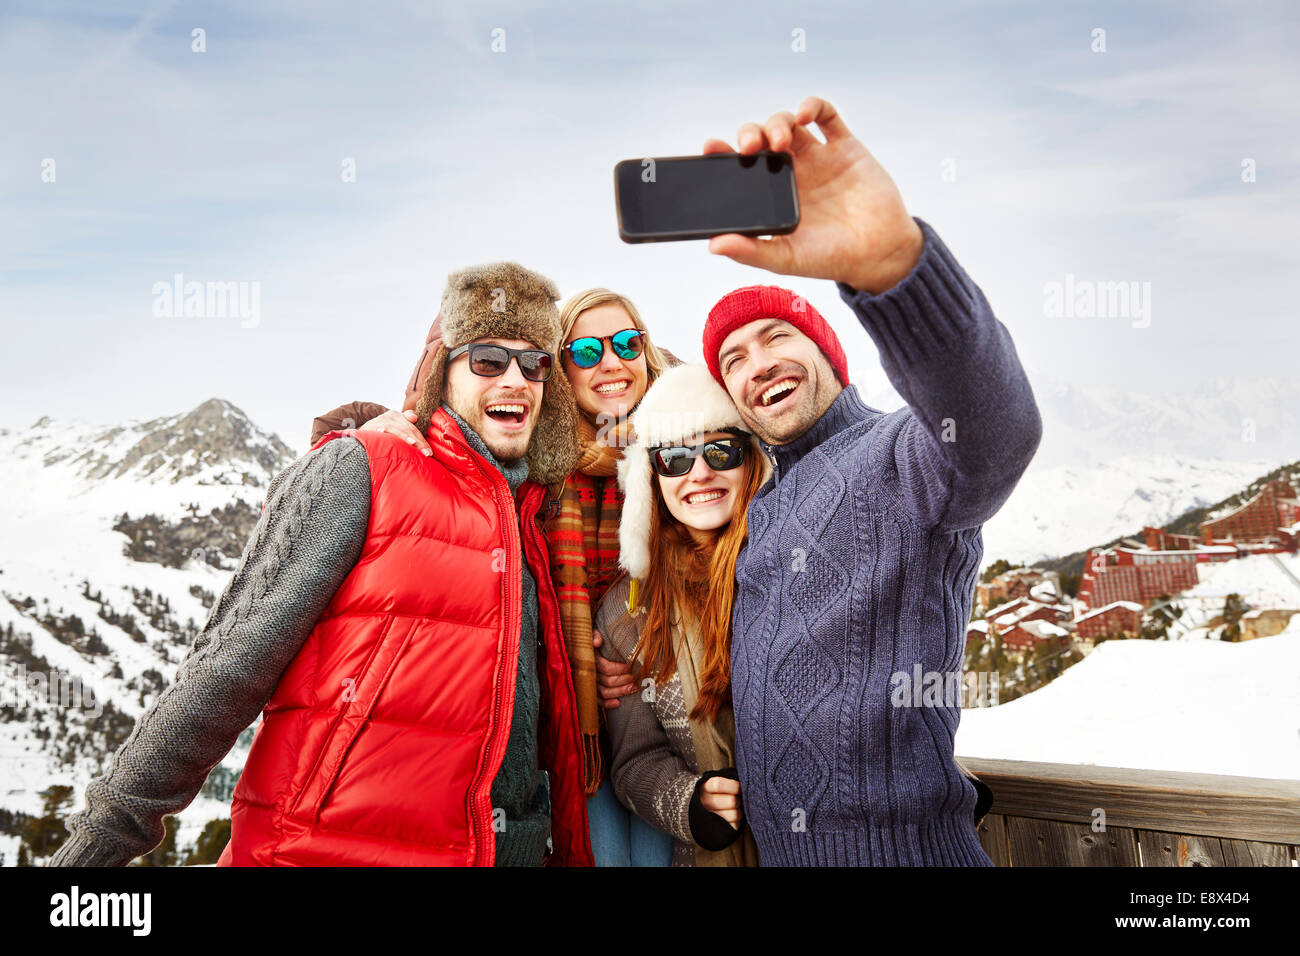 Friends taking picture together in the snow Stock Photo